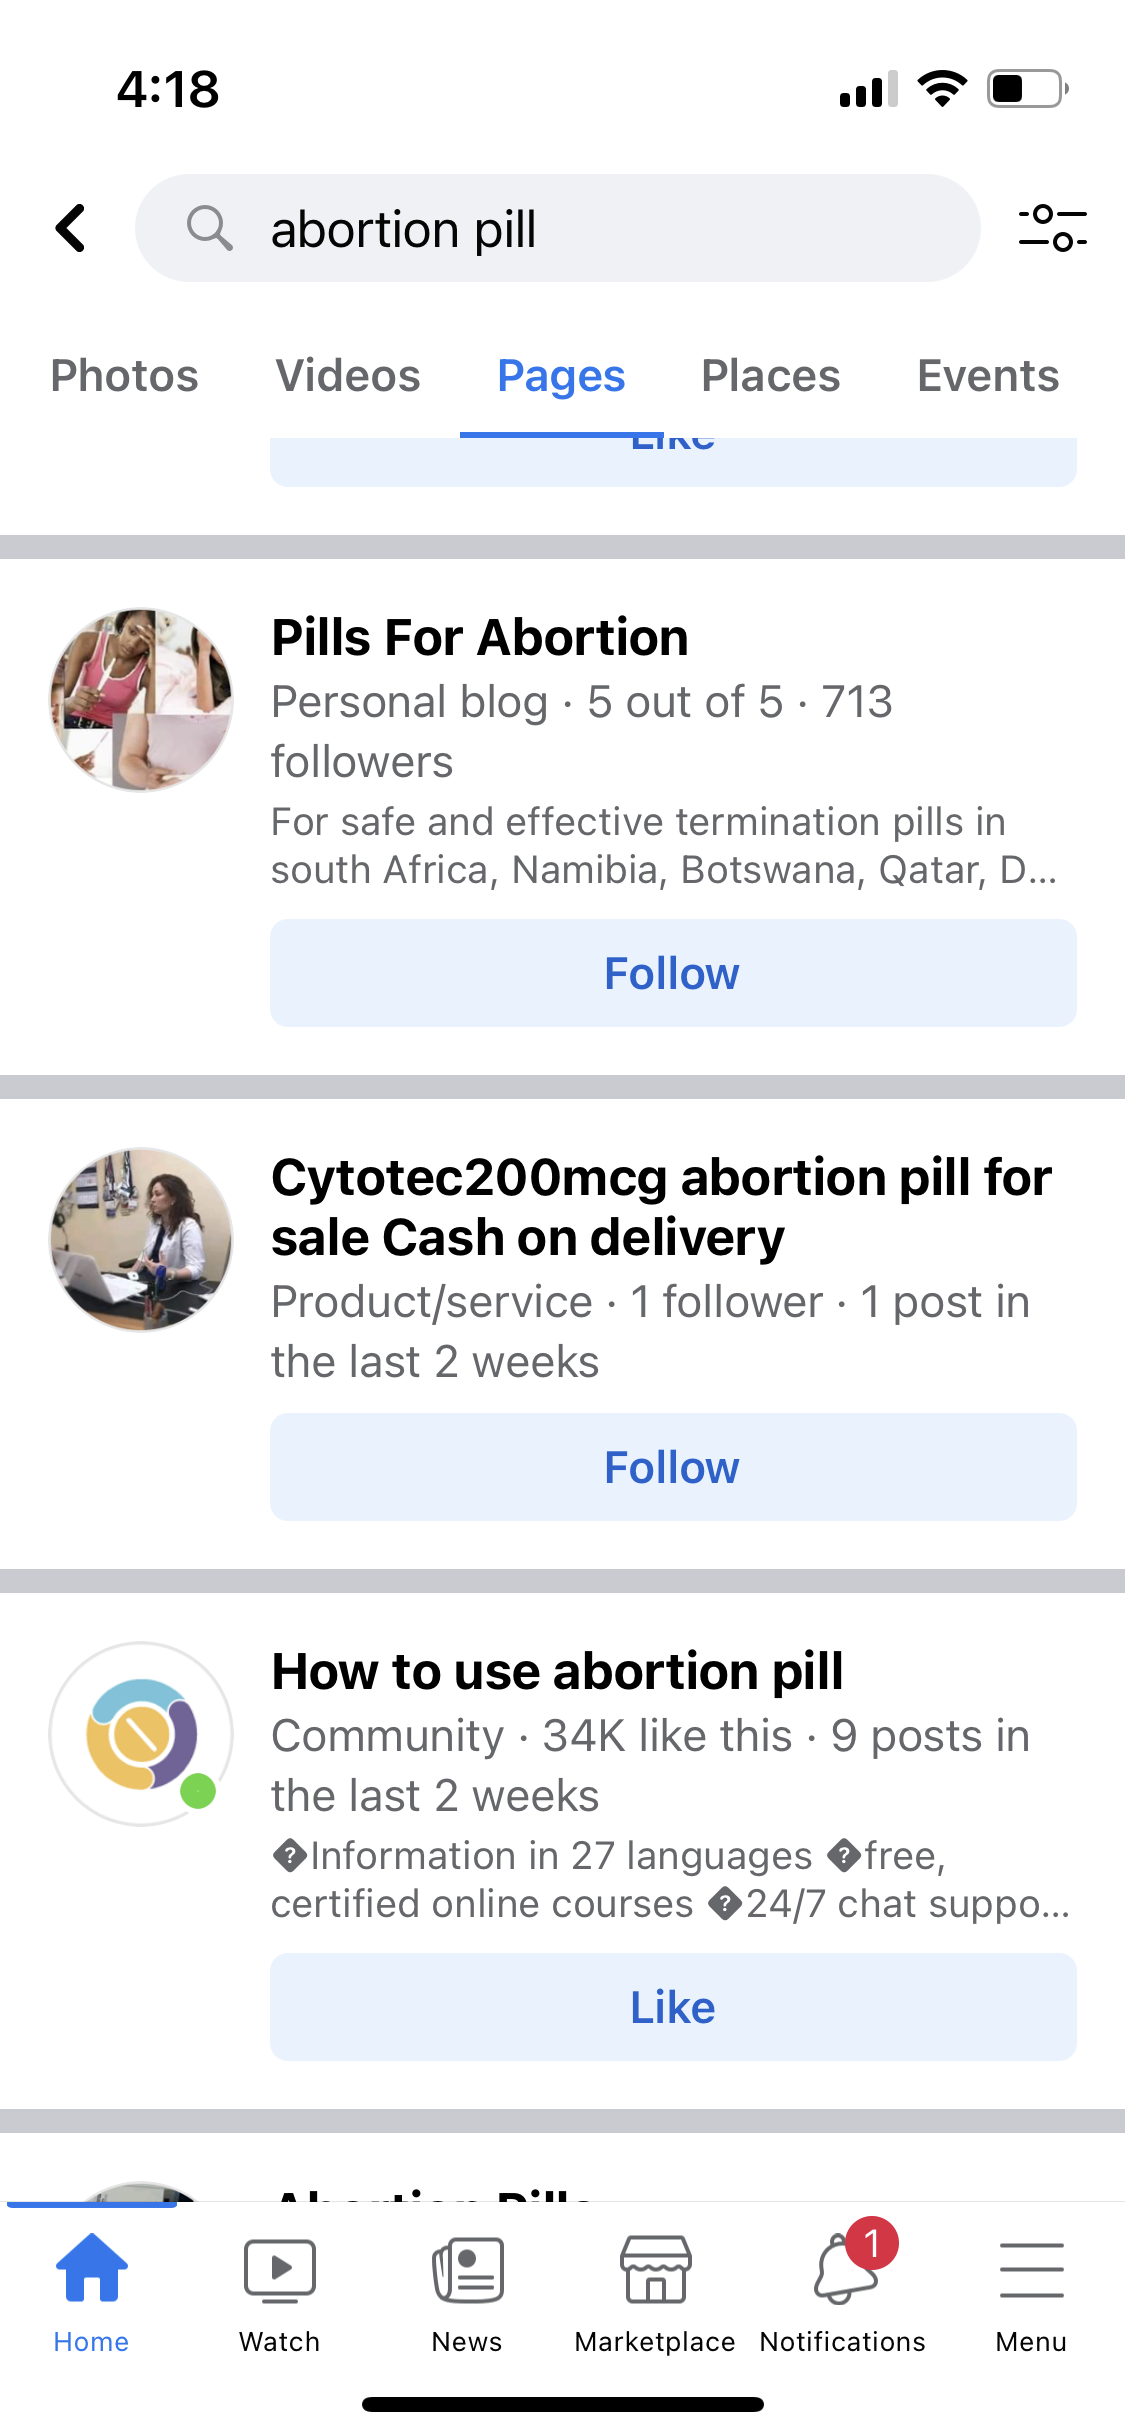 Facebook shuts down abortion pill reversal info page, restores days later